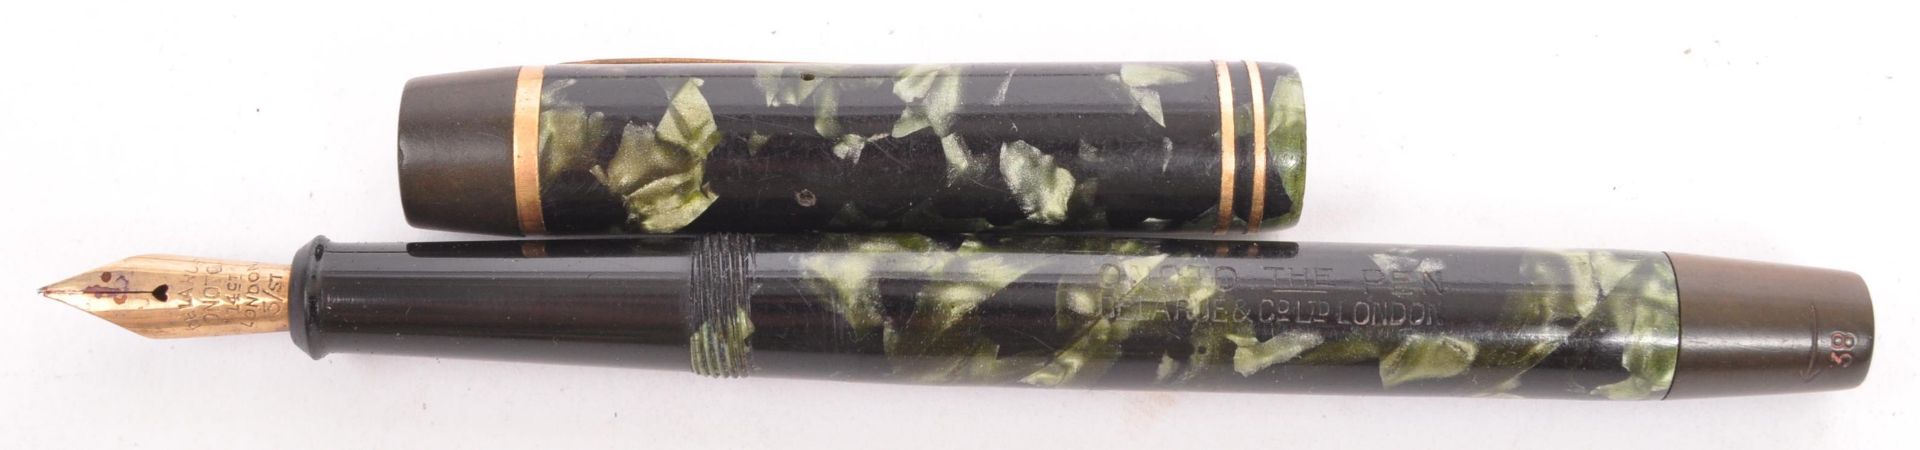 THREE VINTAGE FOUNTAIN PENS BY ONOTO / WATERMANS & WYVERN - Image 2 of 7